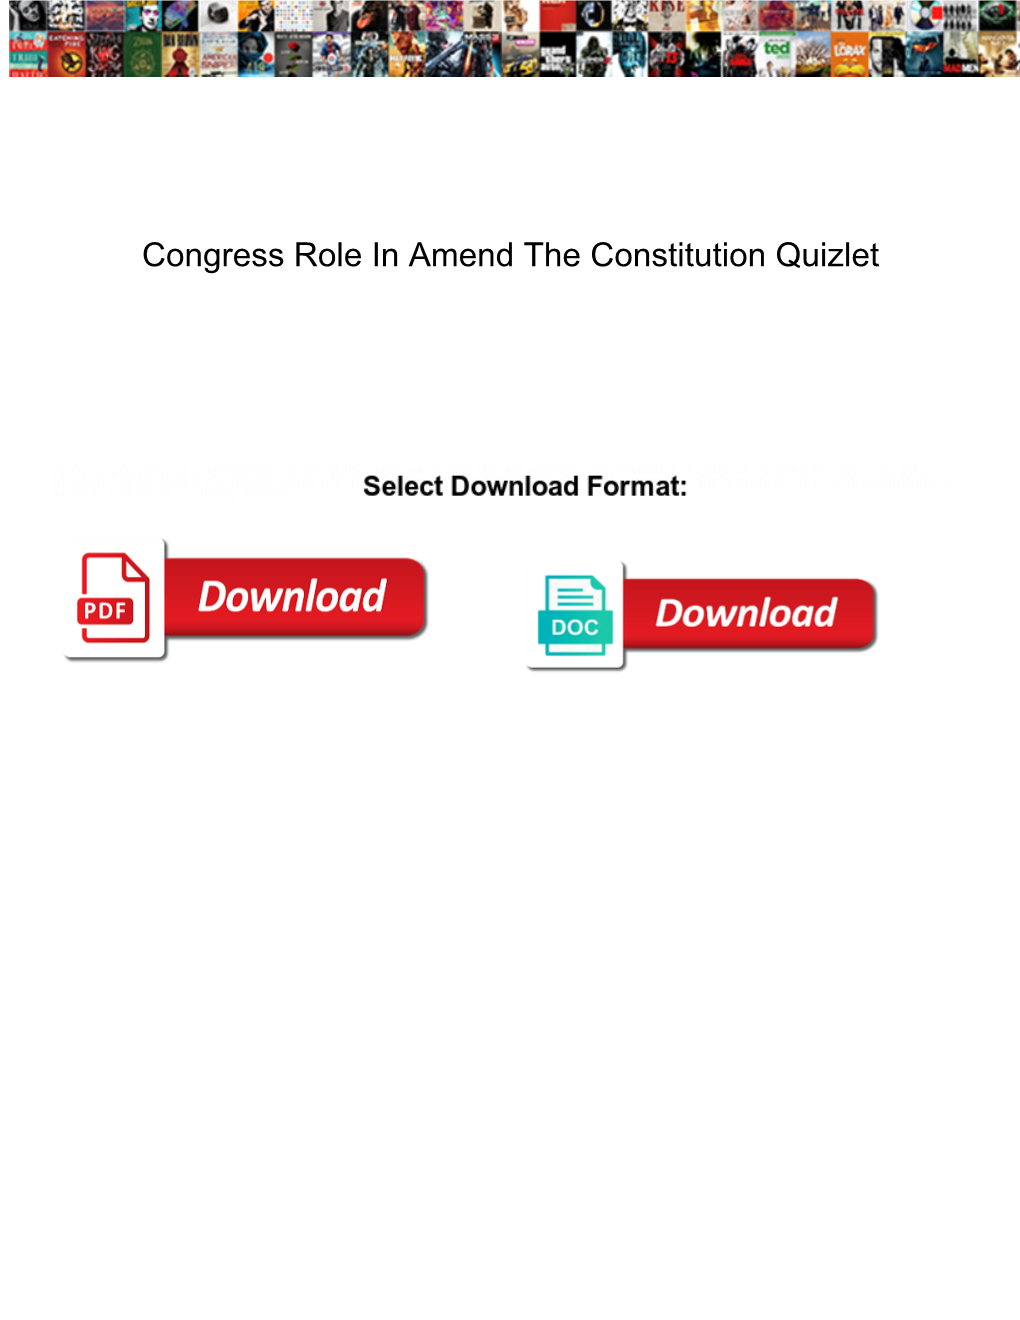 Congress Role in Amend the Constitution Quizlet